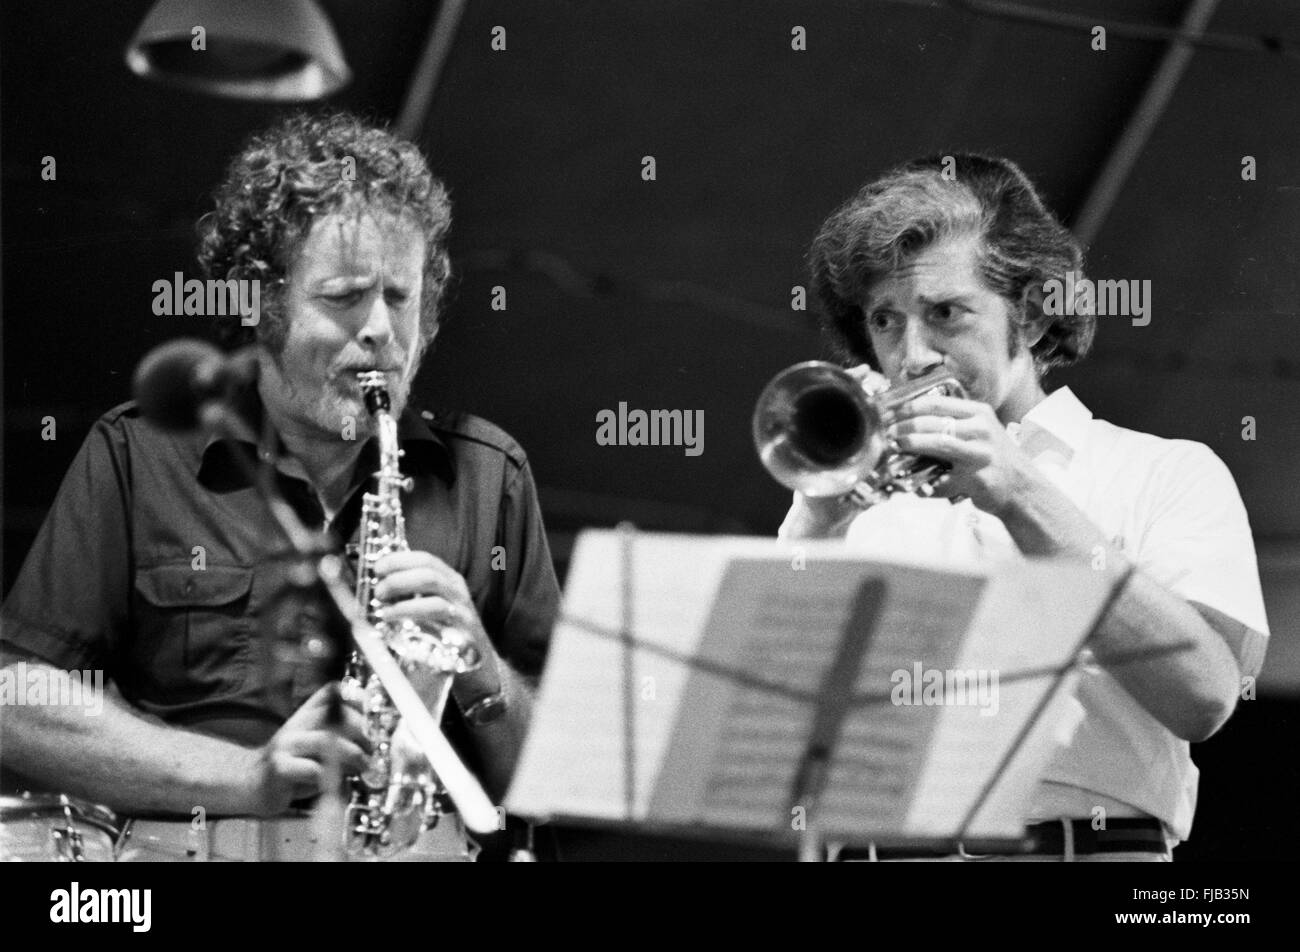 Bob Wilber on saxophone and Mike Canonico on trumpet, at the Kool Jazz Festival in Stanhope, New Jersey, June 1982. Stock Photo